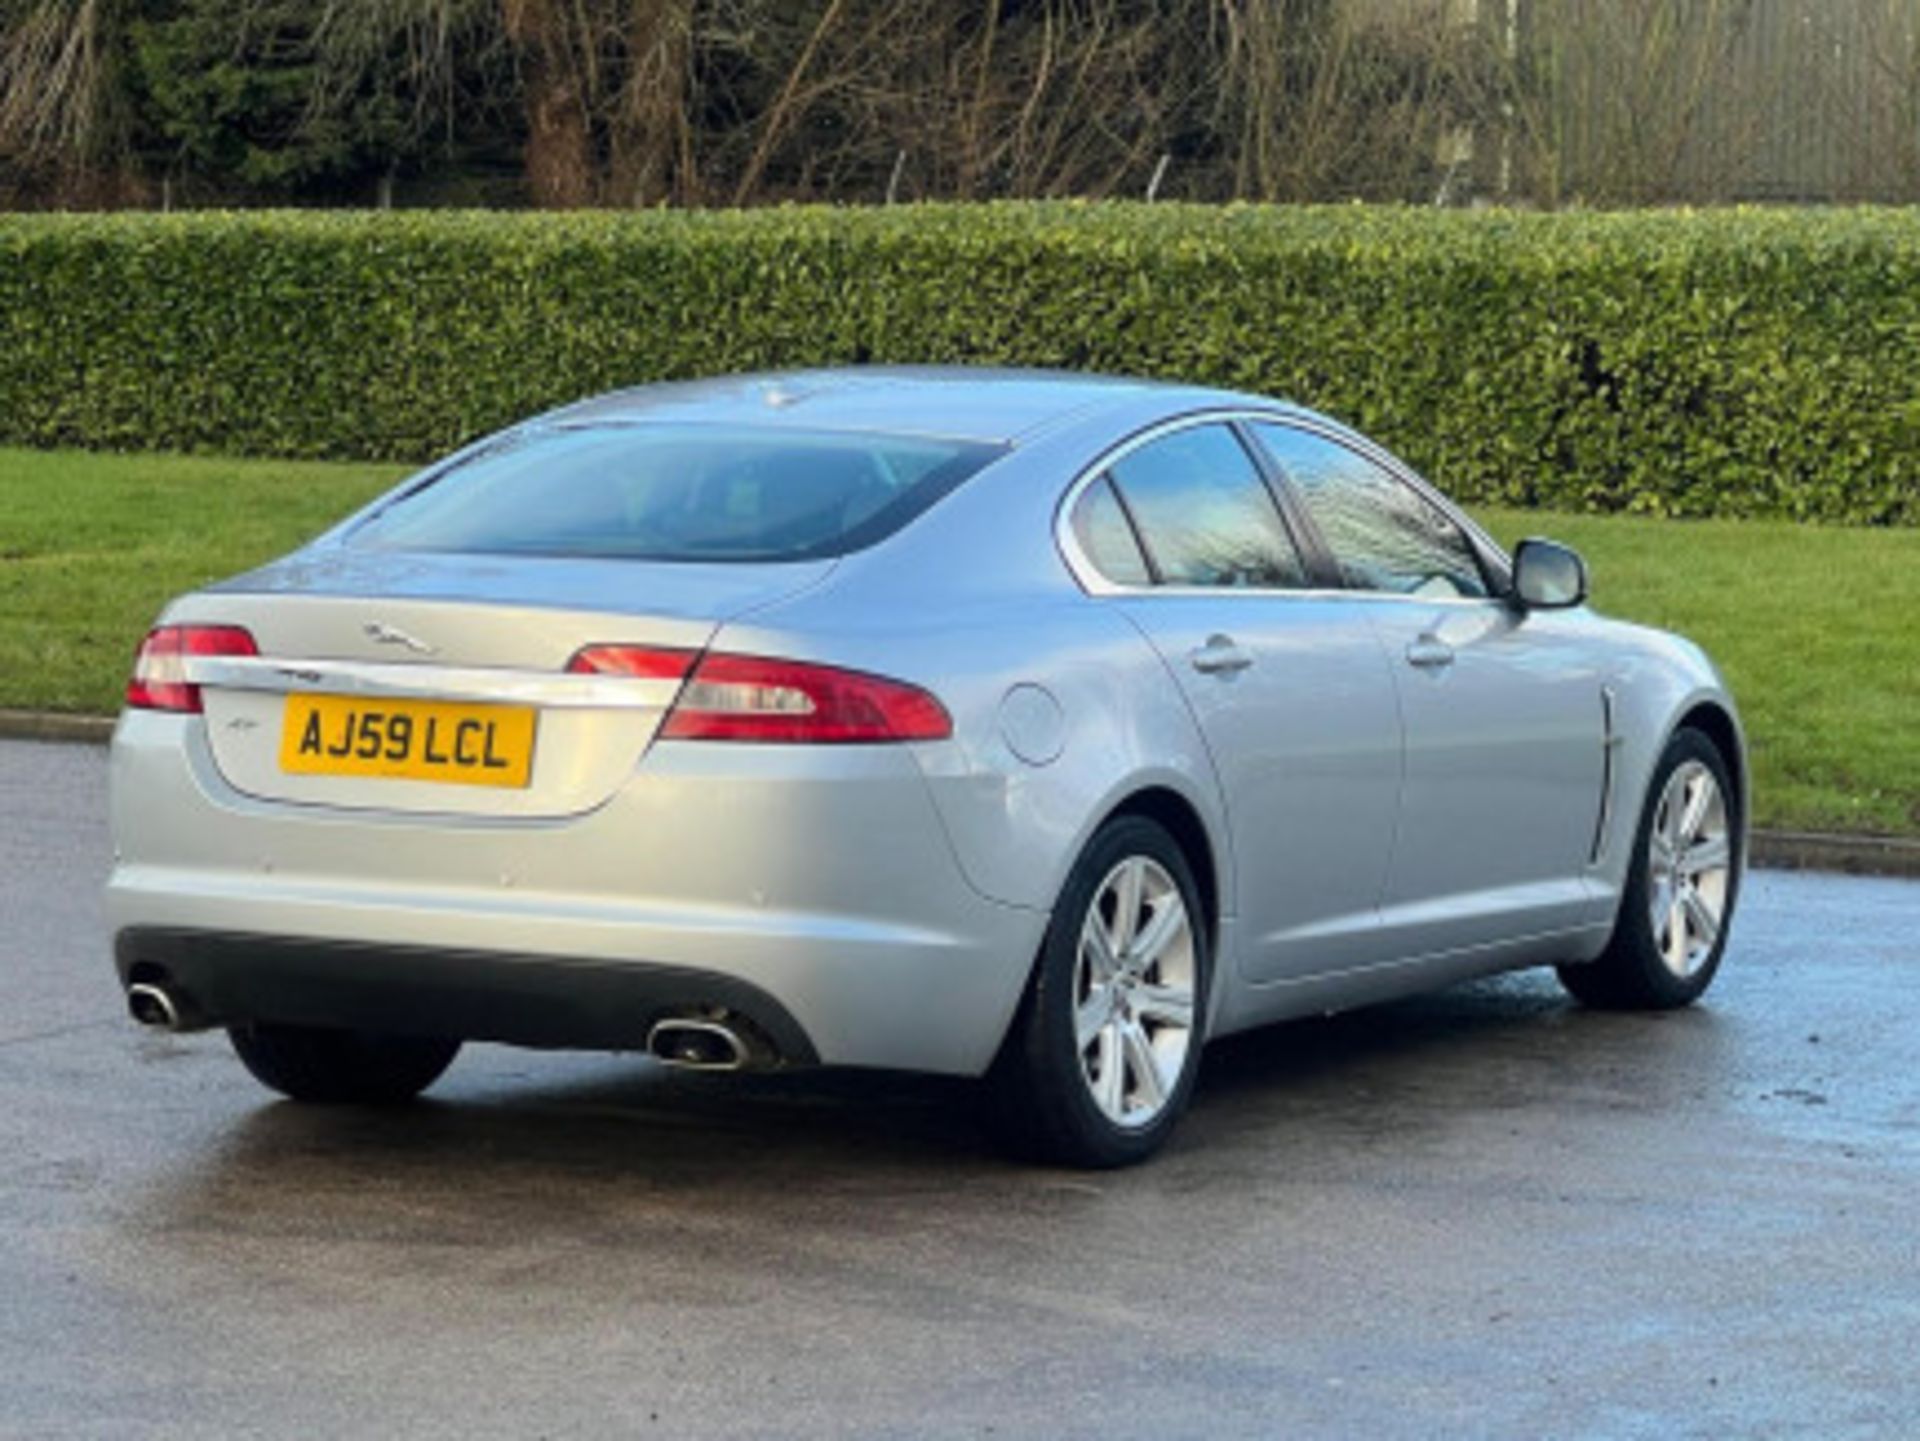 LUXURIOUS JAGUAR XF 3.0D V6 LUXURY 4DR AUTOMATIC SALOON >>--NO VAT ON HAMMER--<< - Image 42 of 80